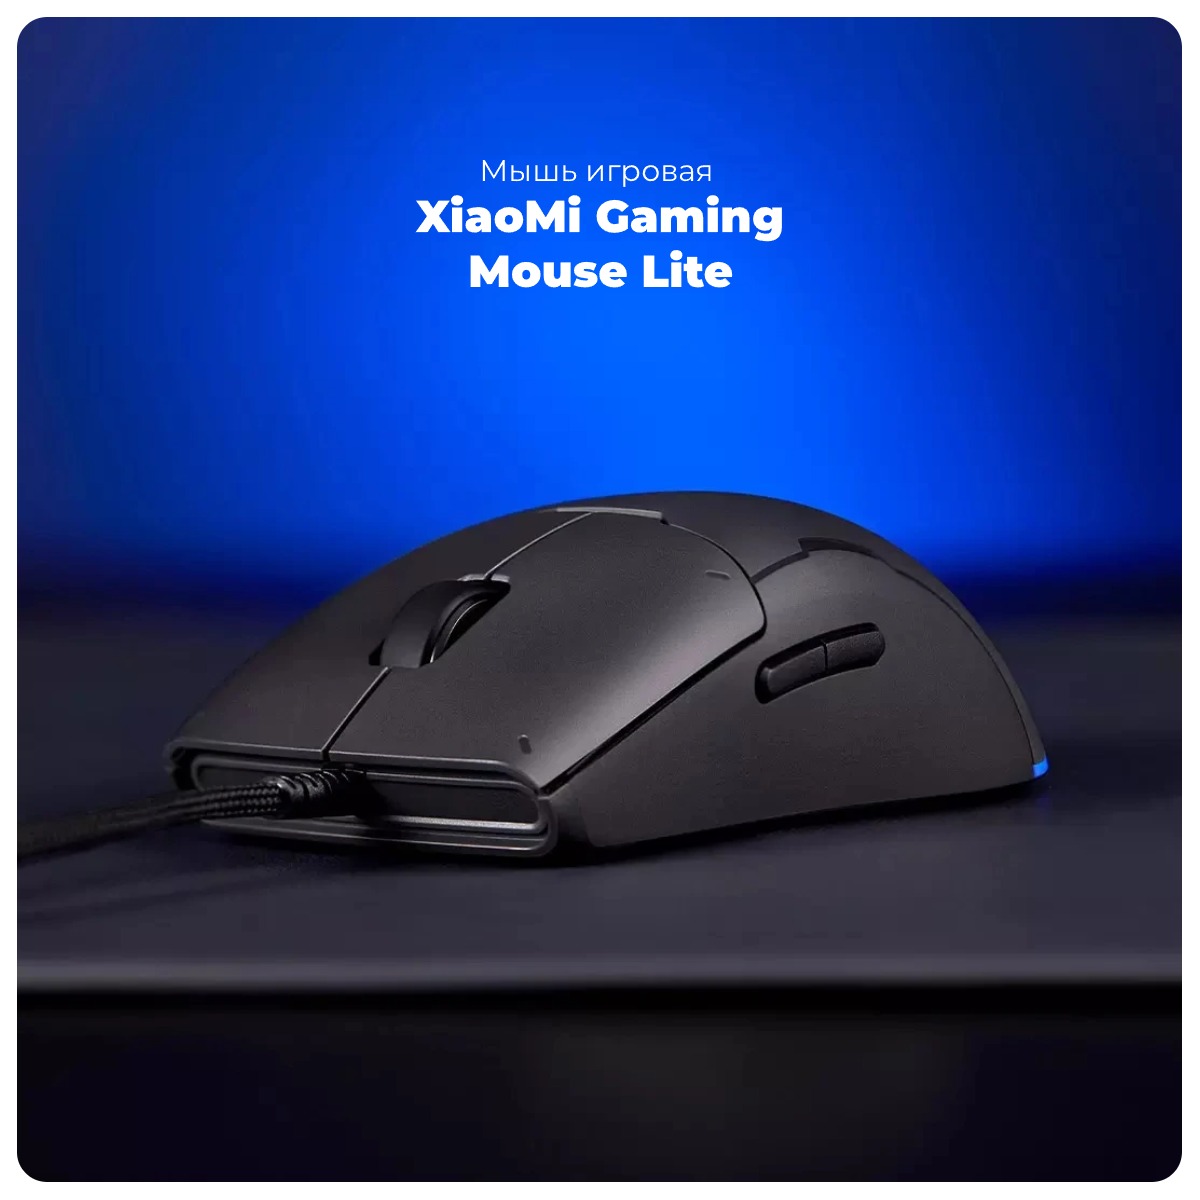 XiaoMi-Gaming-Mouse-Lite-01